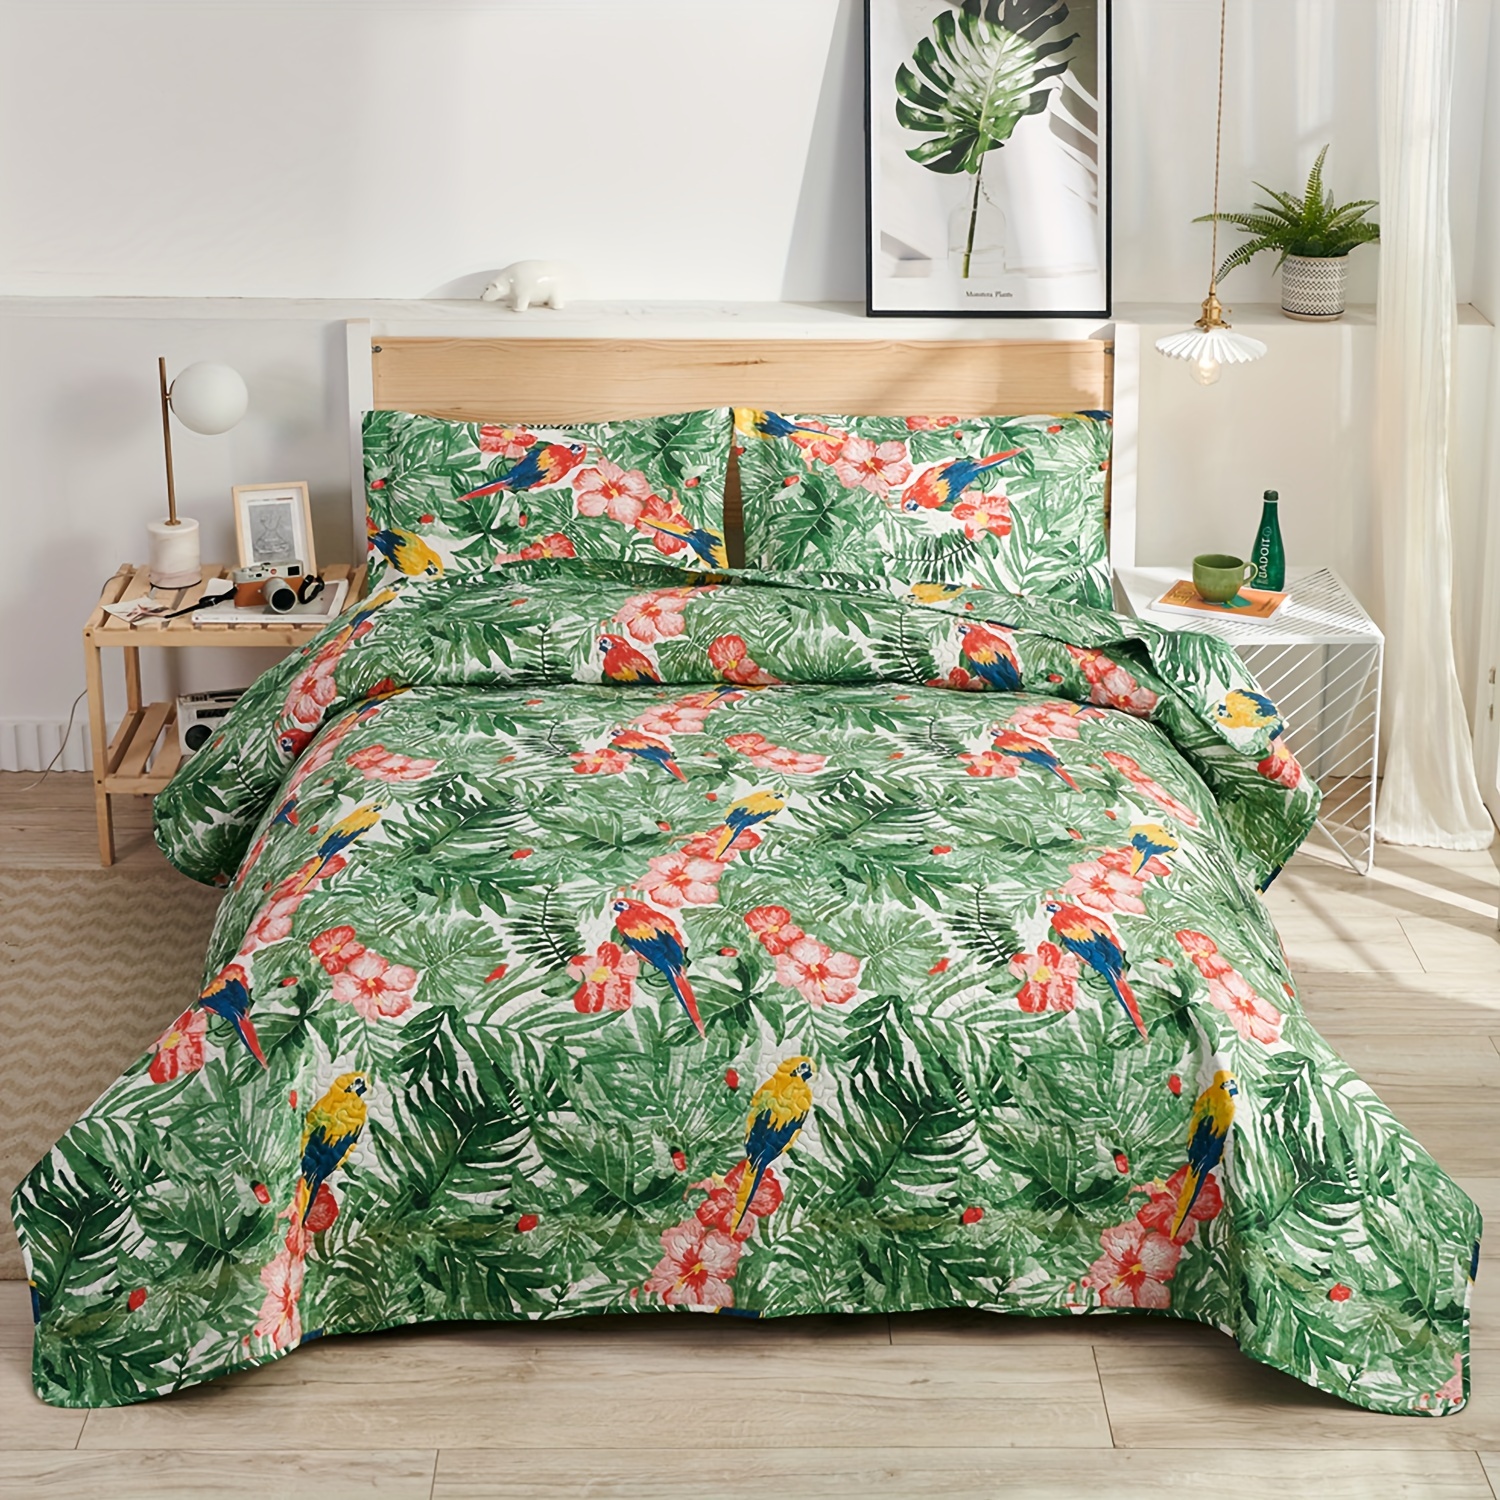 

Tropical Plants Quilt Set 3 Pieces, Rainforest Style Reversible Bedspreads Bedding Sets, Soft And Lightweight Bed Coverlet For All Season